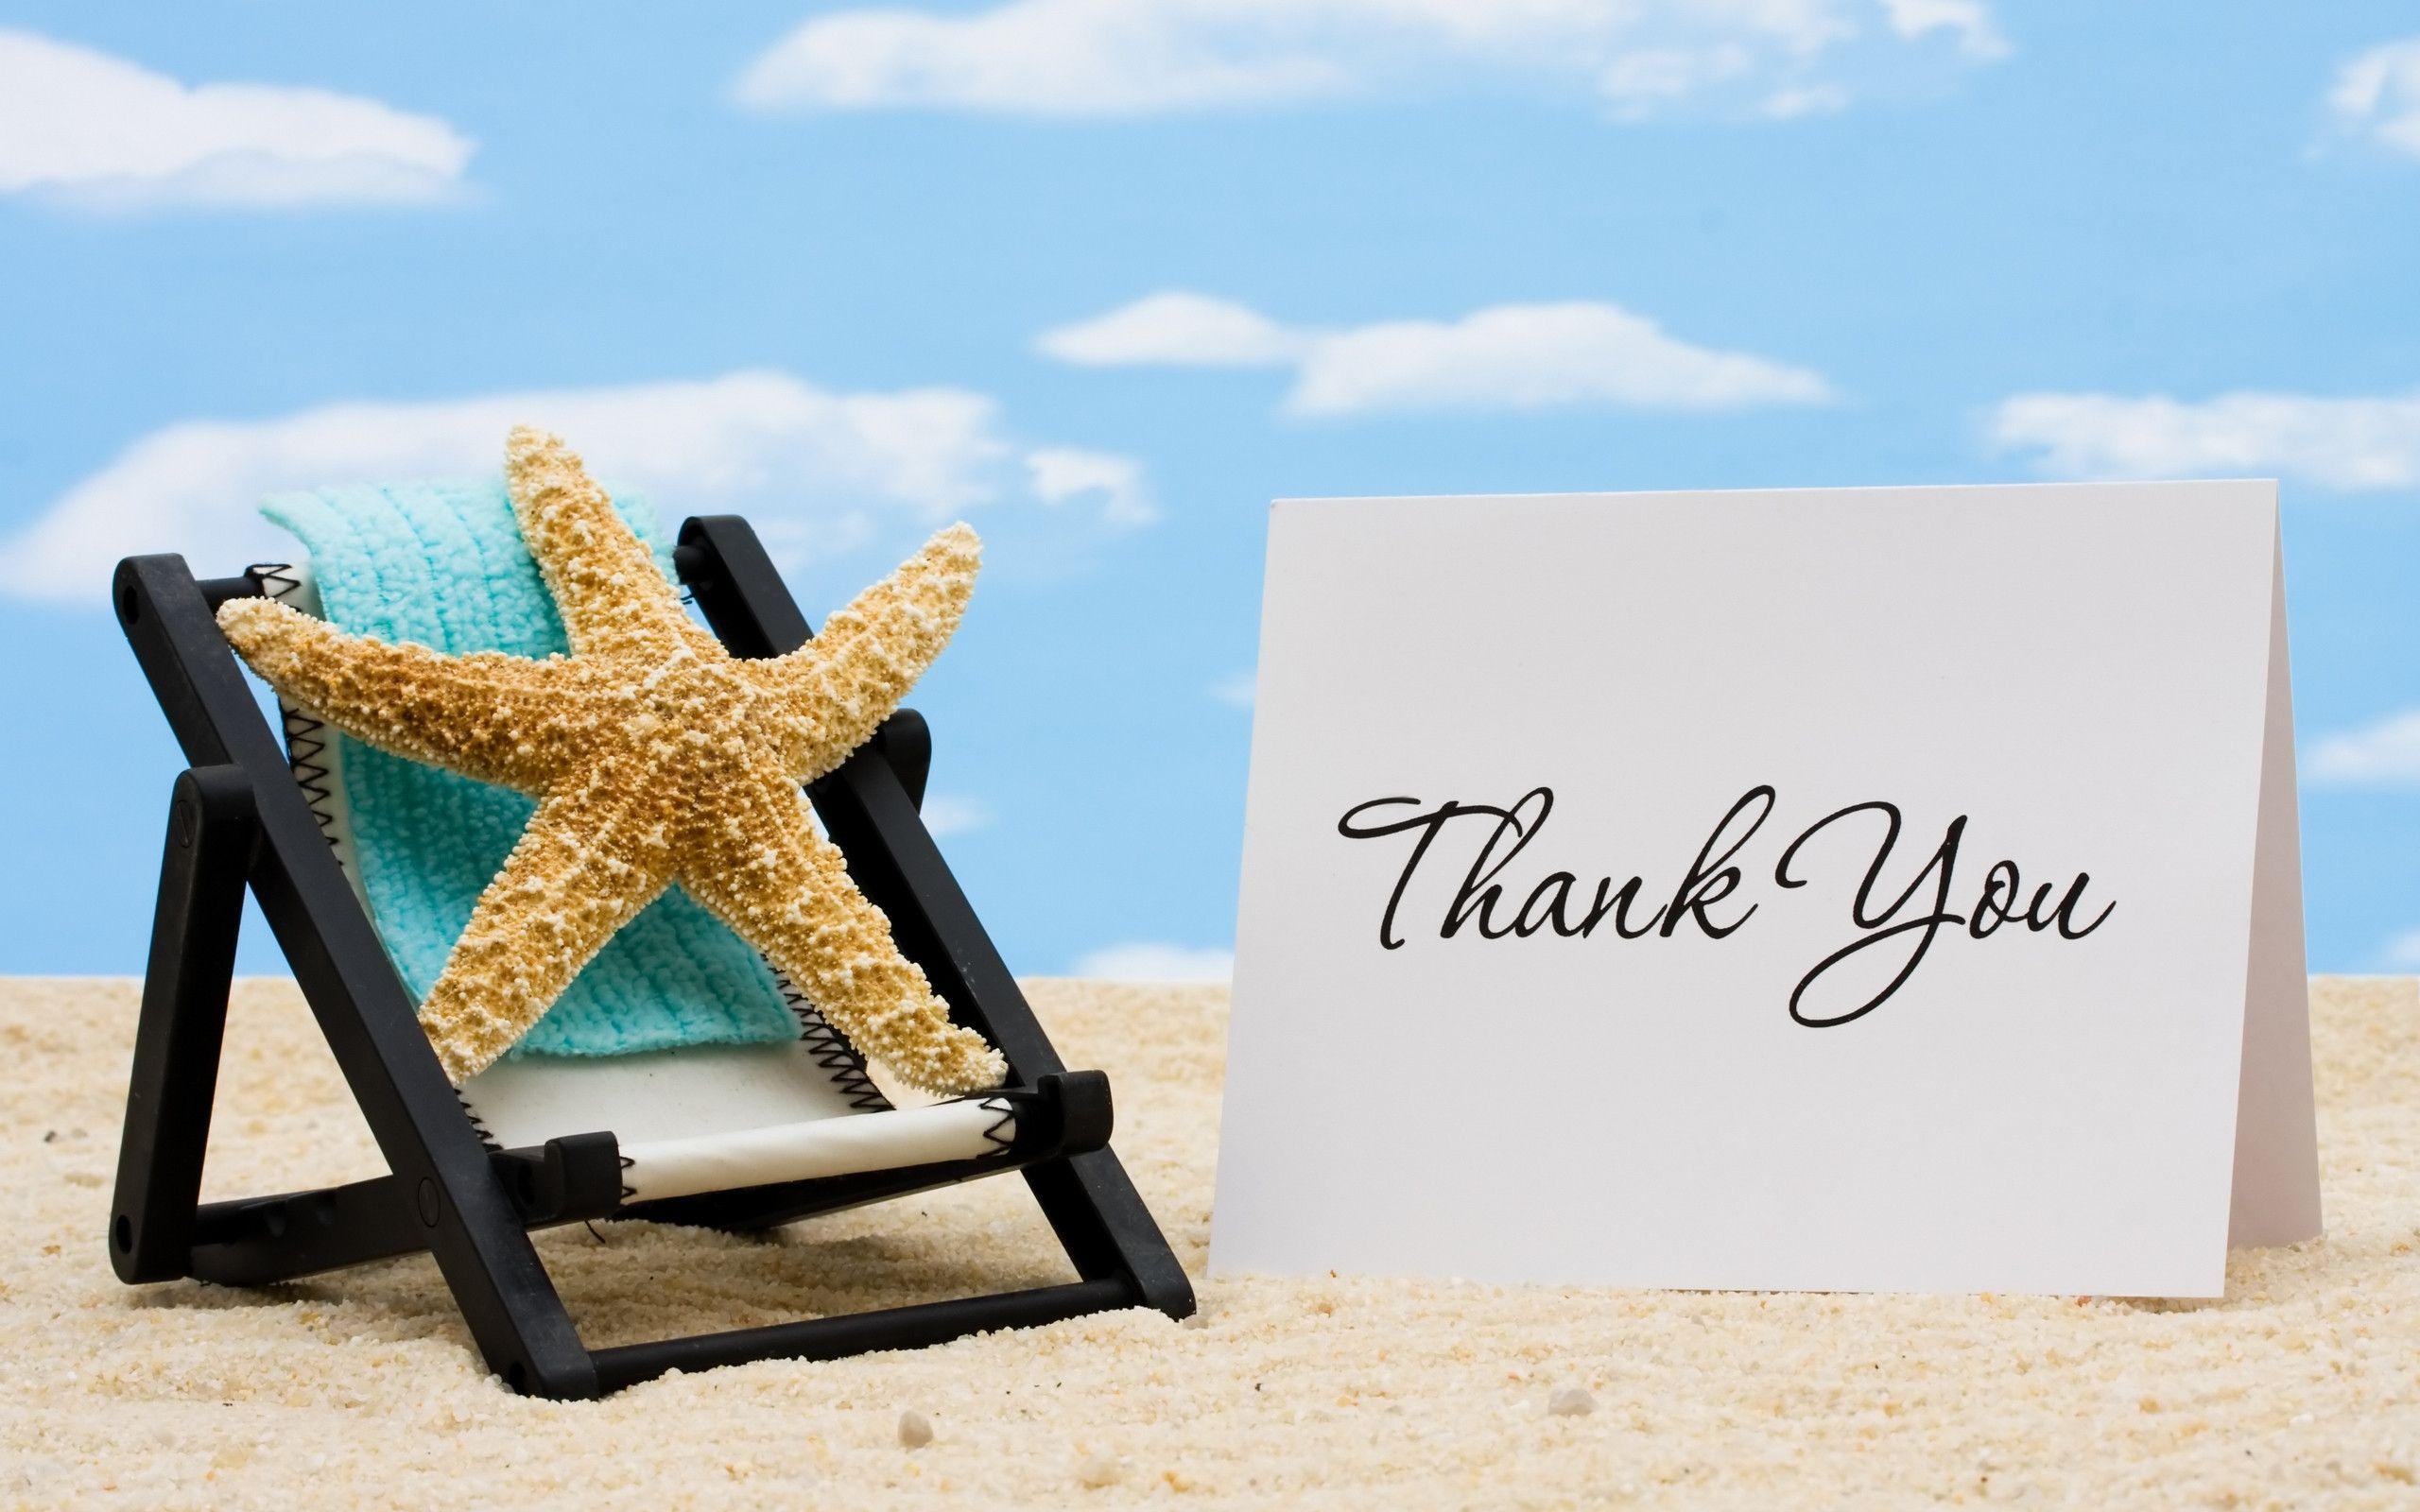 Thank You HD Wallpaper, Picture Free Download 2014